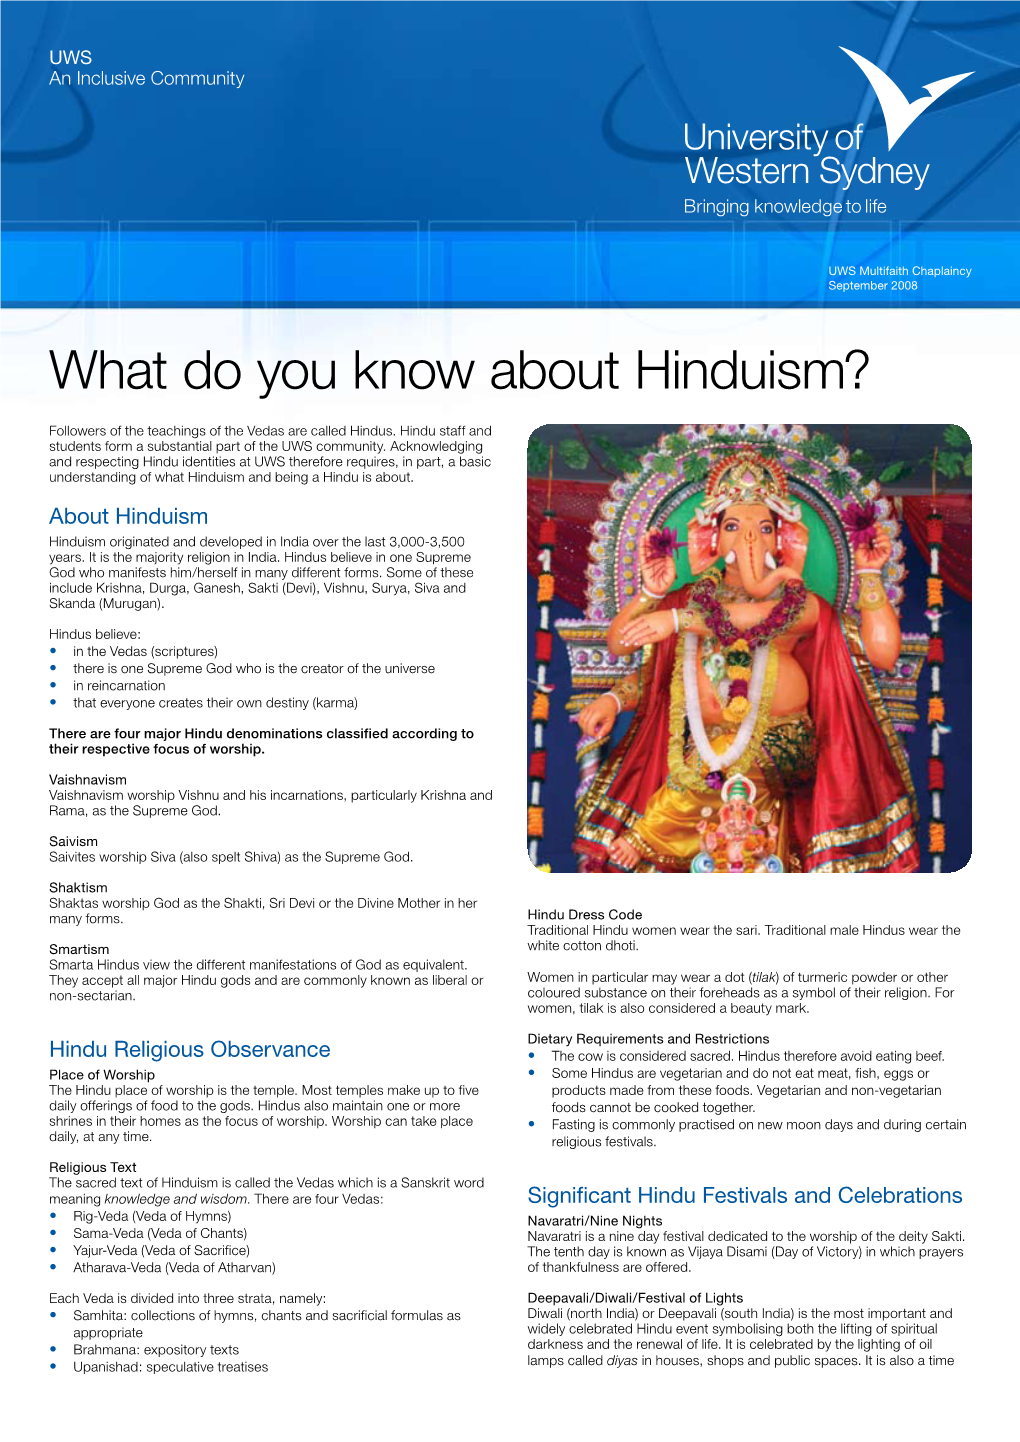 What Do You Know About Hinduism?